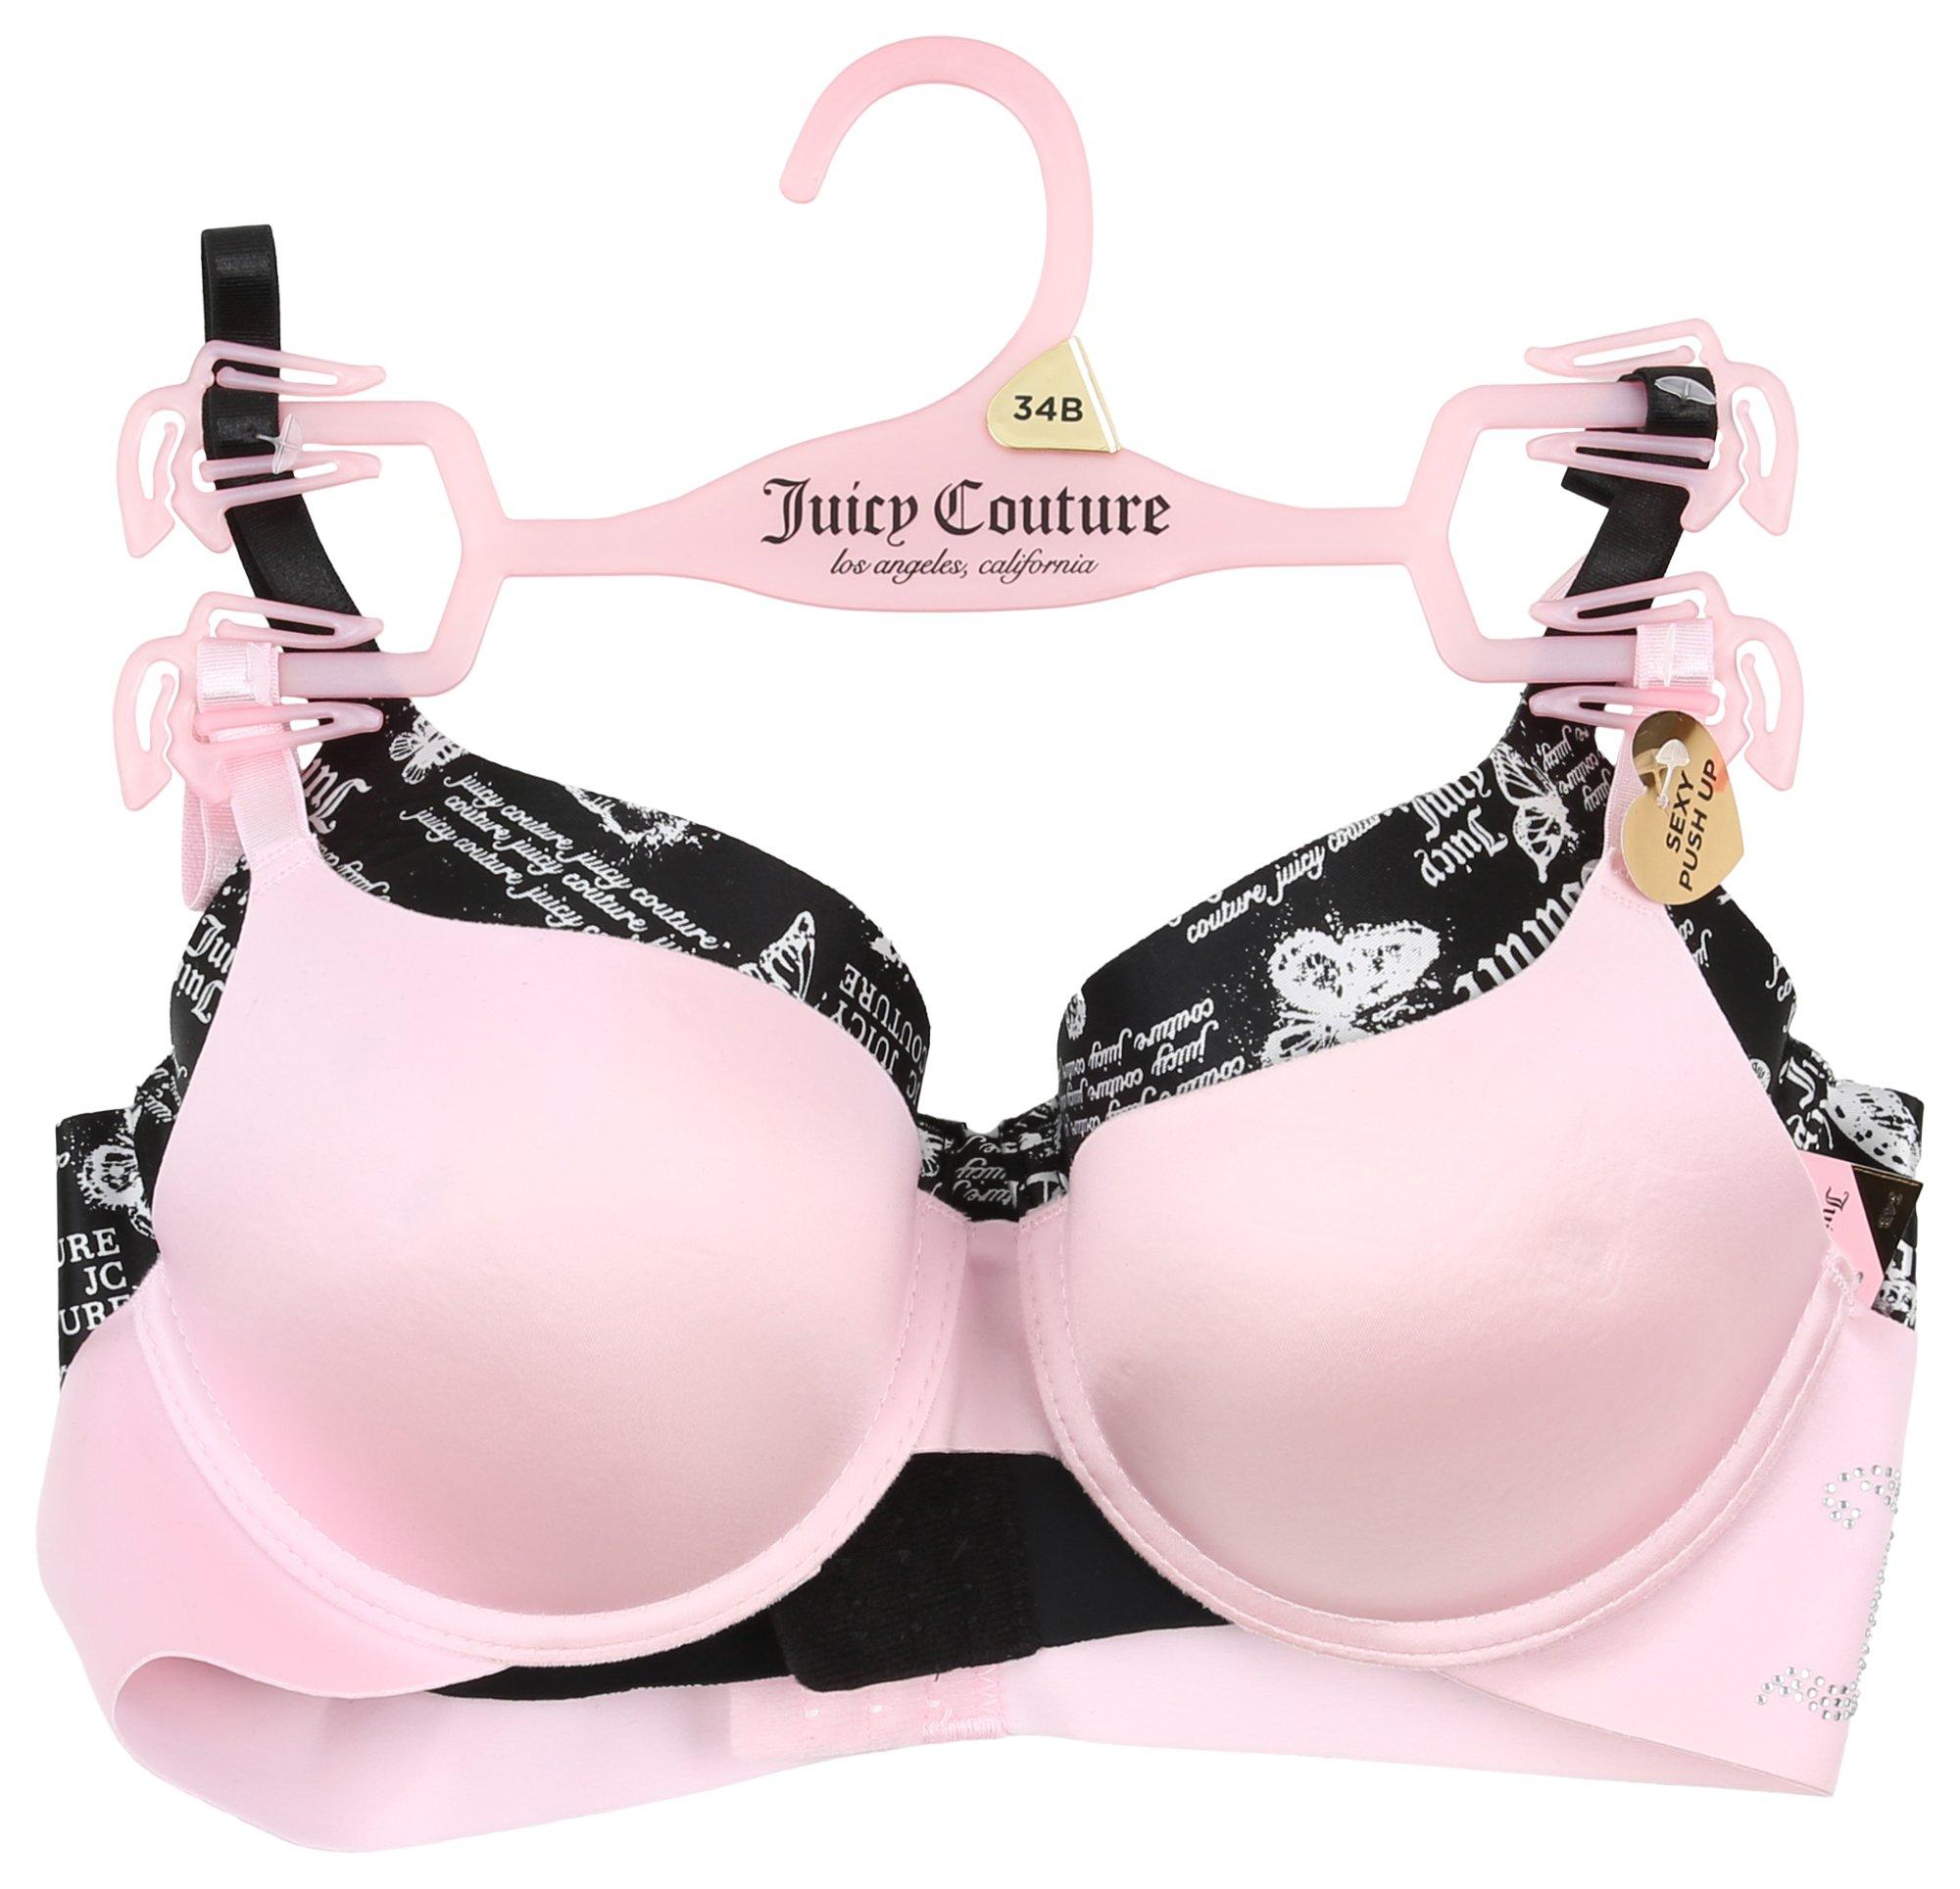 Juicy Couture, Intimates & Sleepwear, Juicy Couture White Pushup Bra Size  38c